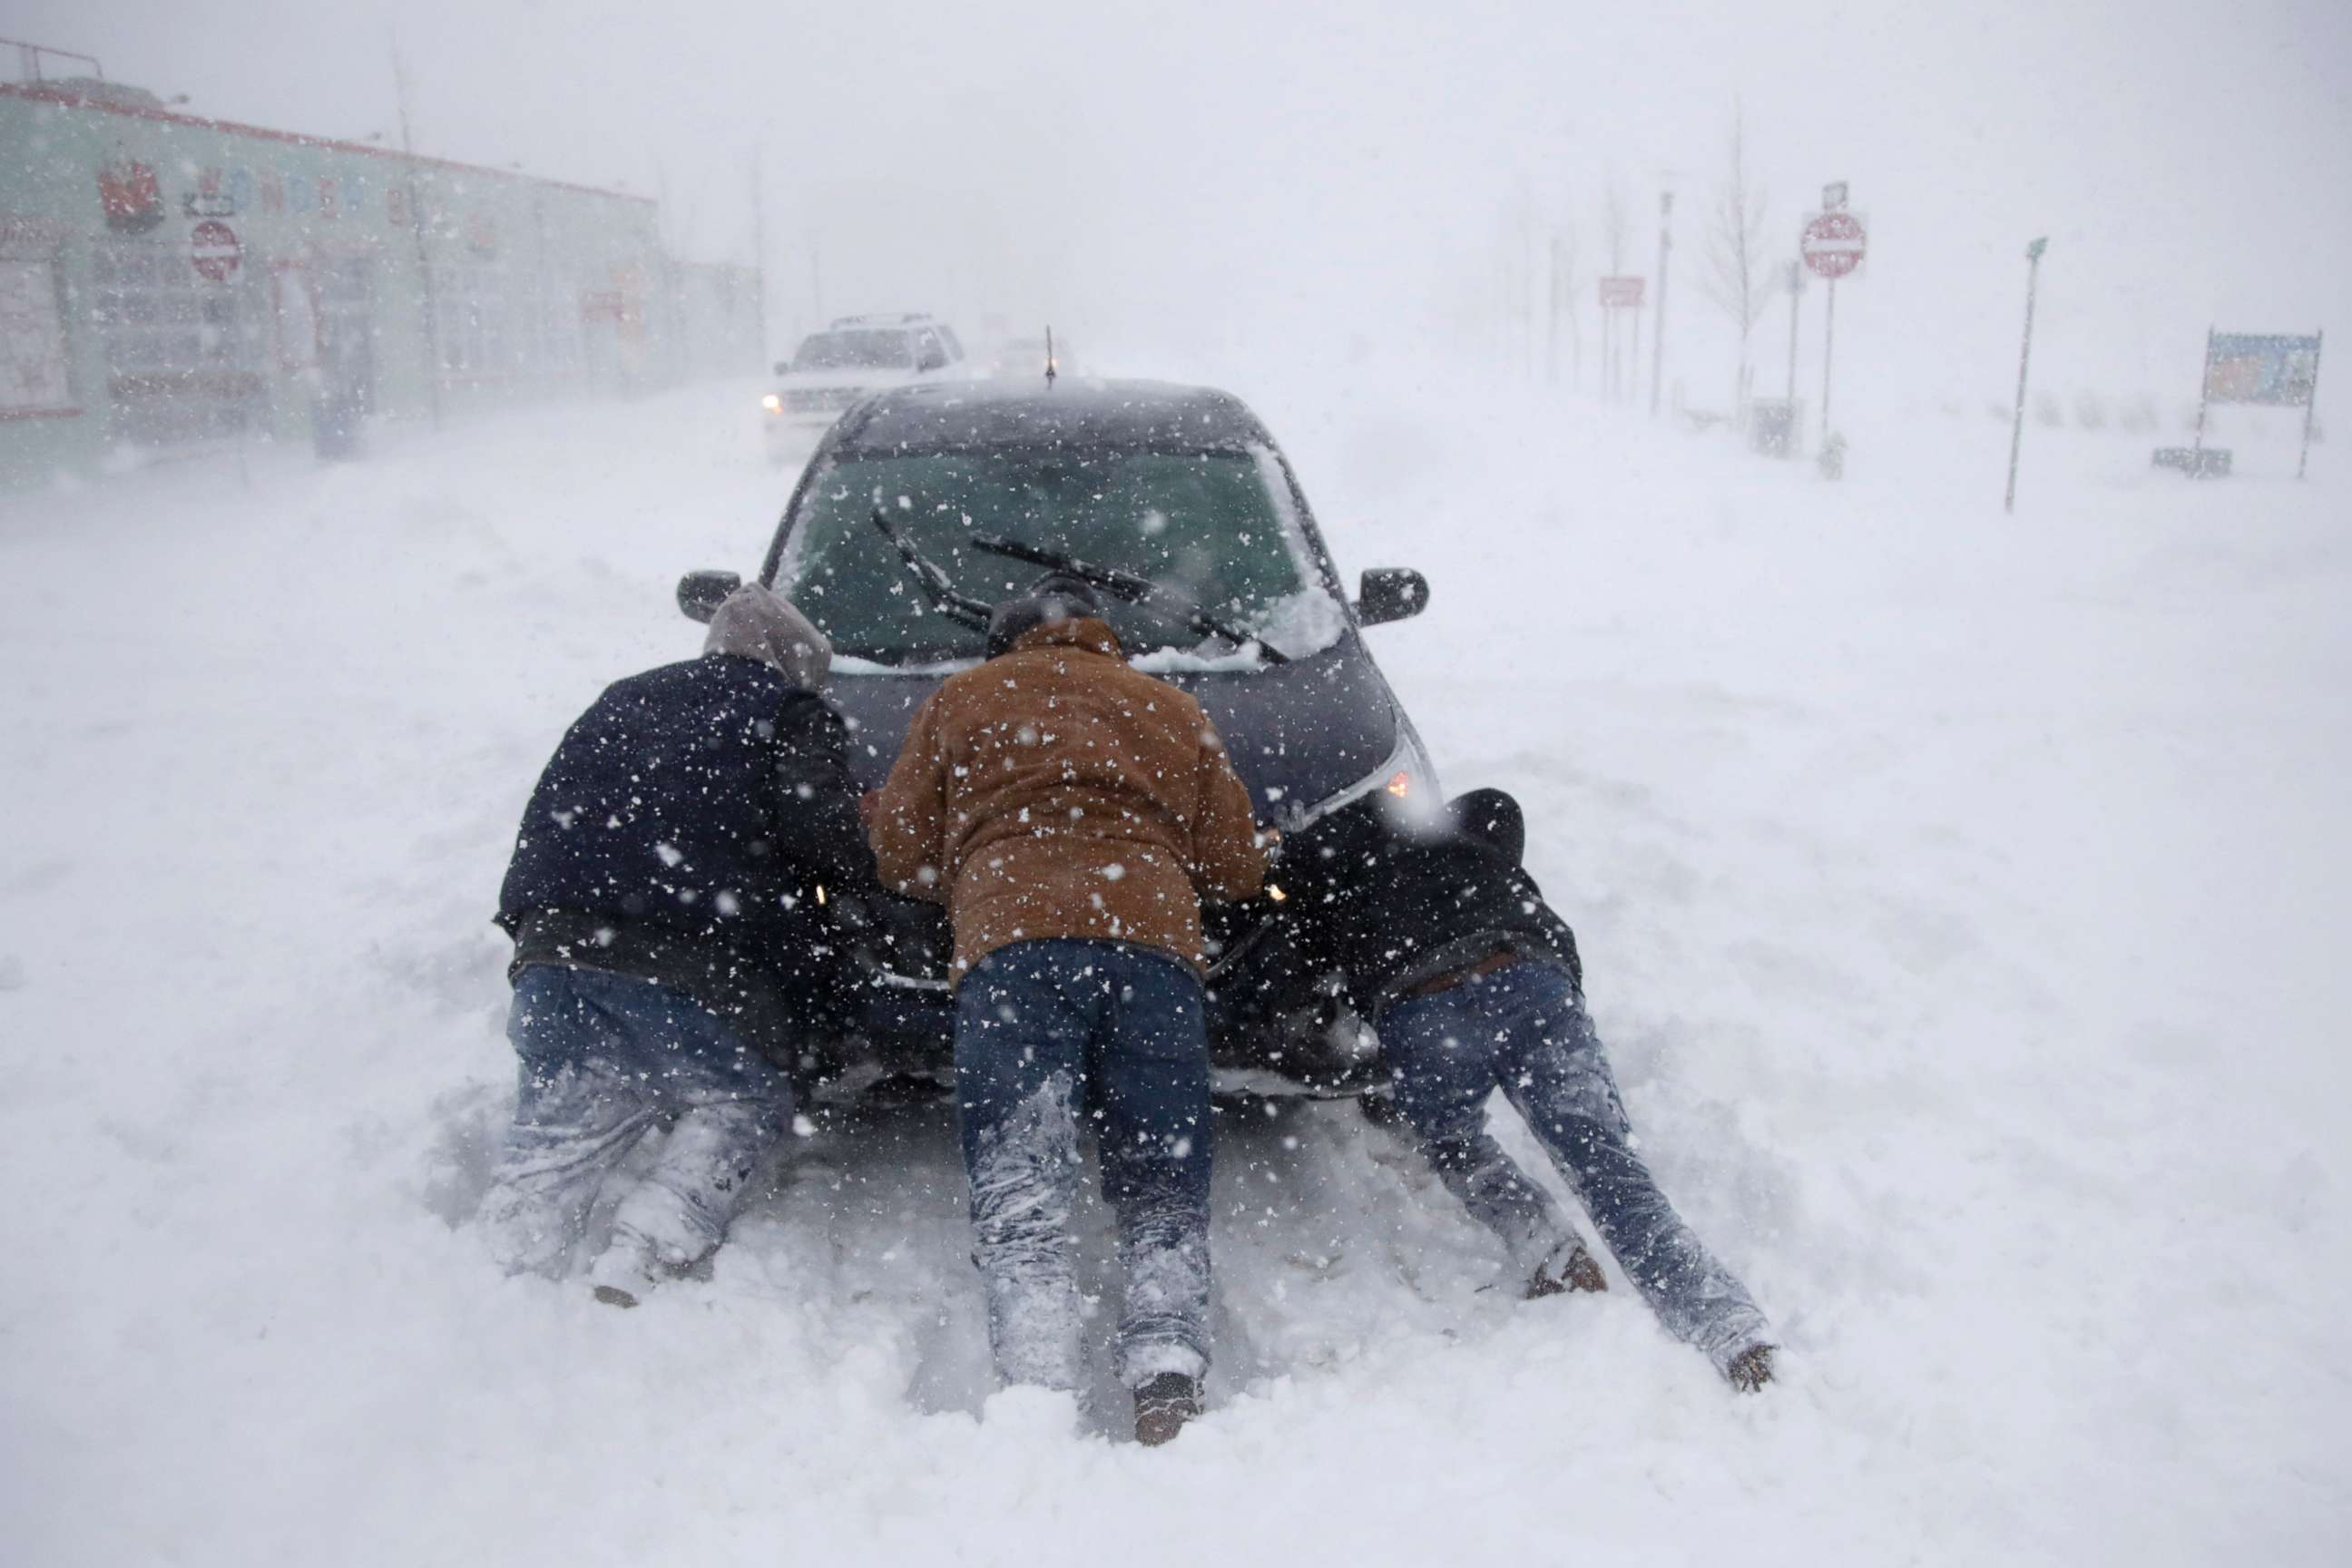 PHOTO: A group of men help a motorist after his vehicle was stuck in the snow near Asbury Park boardwalk during a snowstorm, Jan. 4, 2018, in Asbury Park, N.J. 